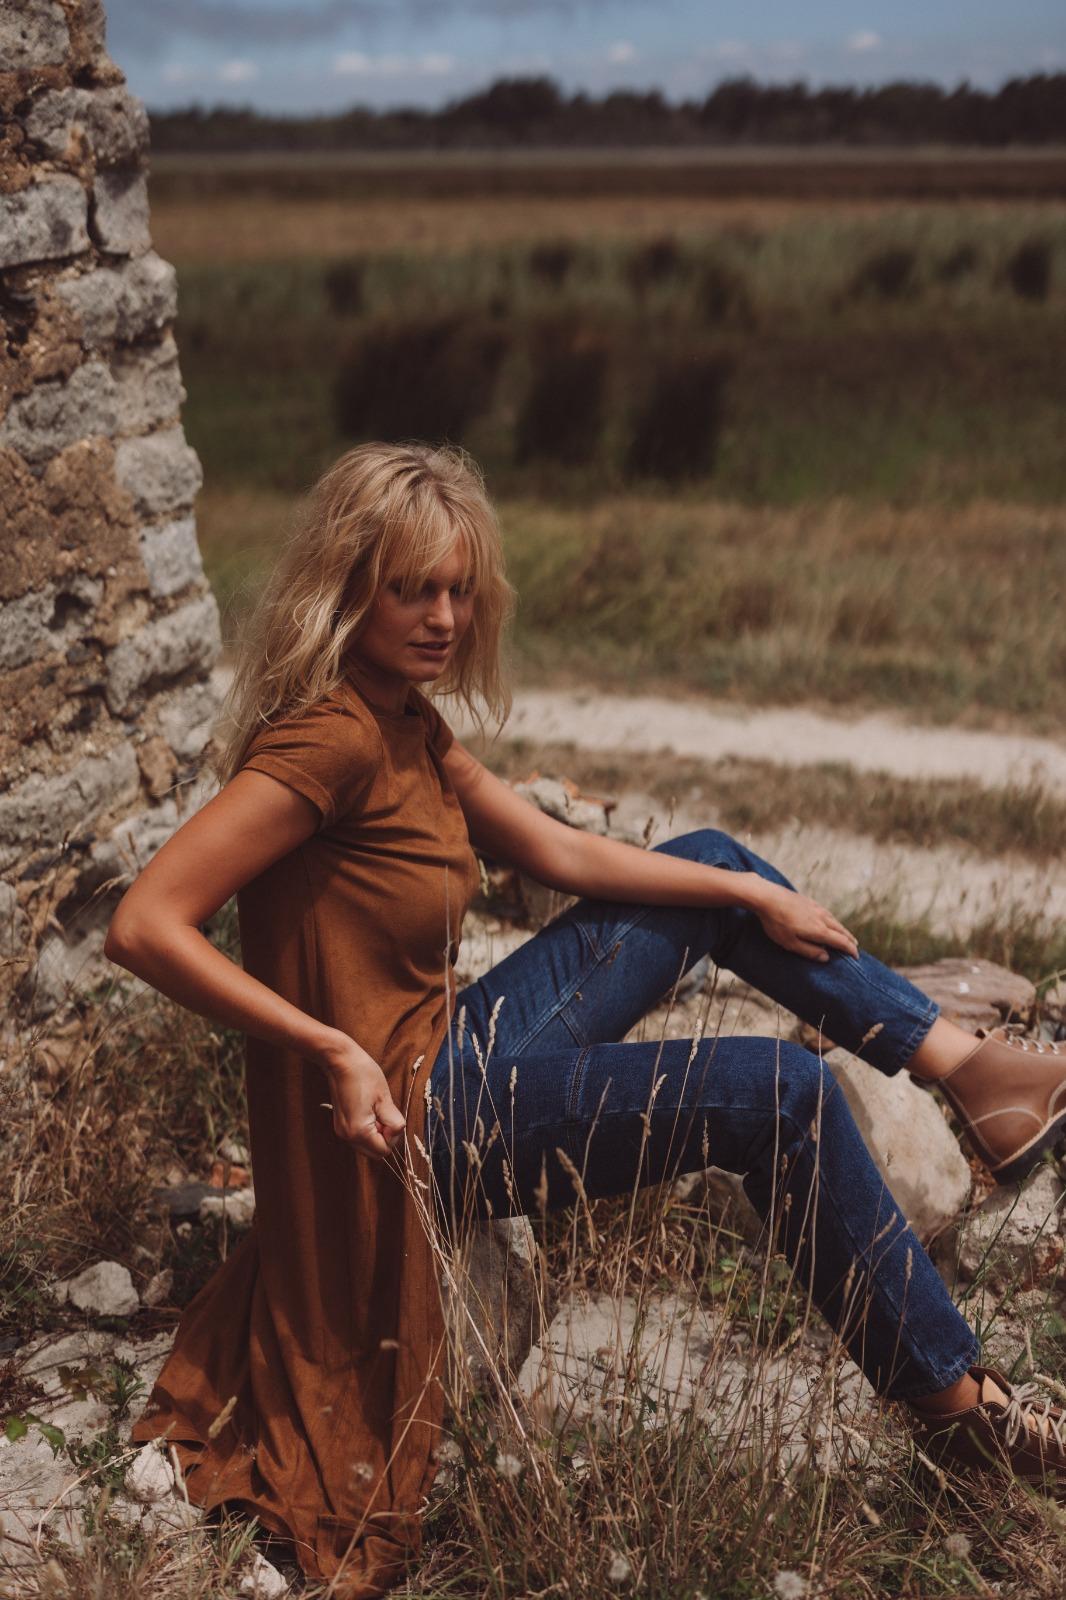 Wollies Jeans EDITORIAL